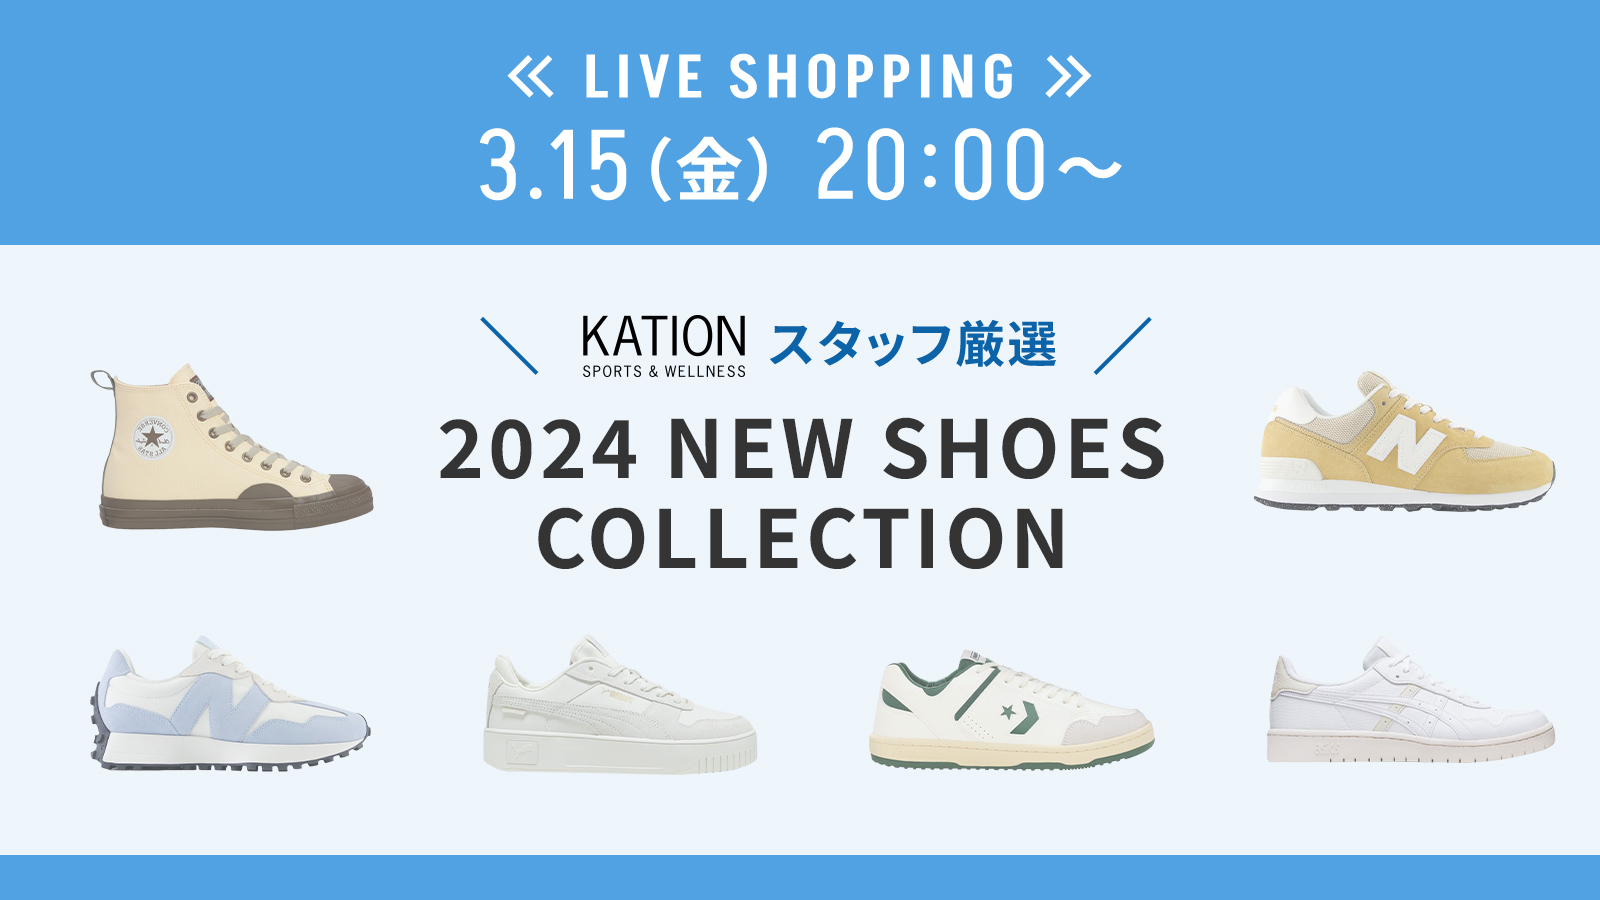 LIVE SHOPPING KATIONスタッフ厳選! 2024 NEW SHOES COLLECTION